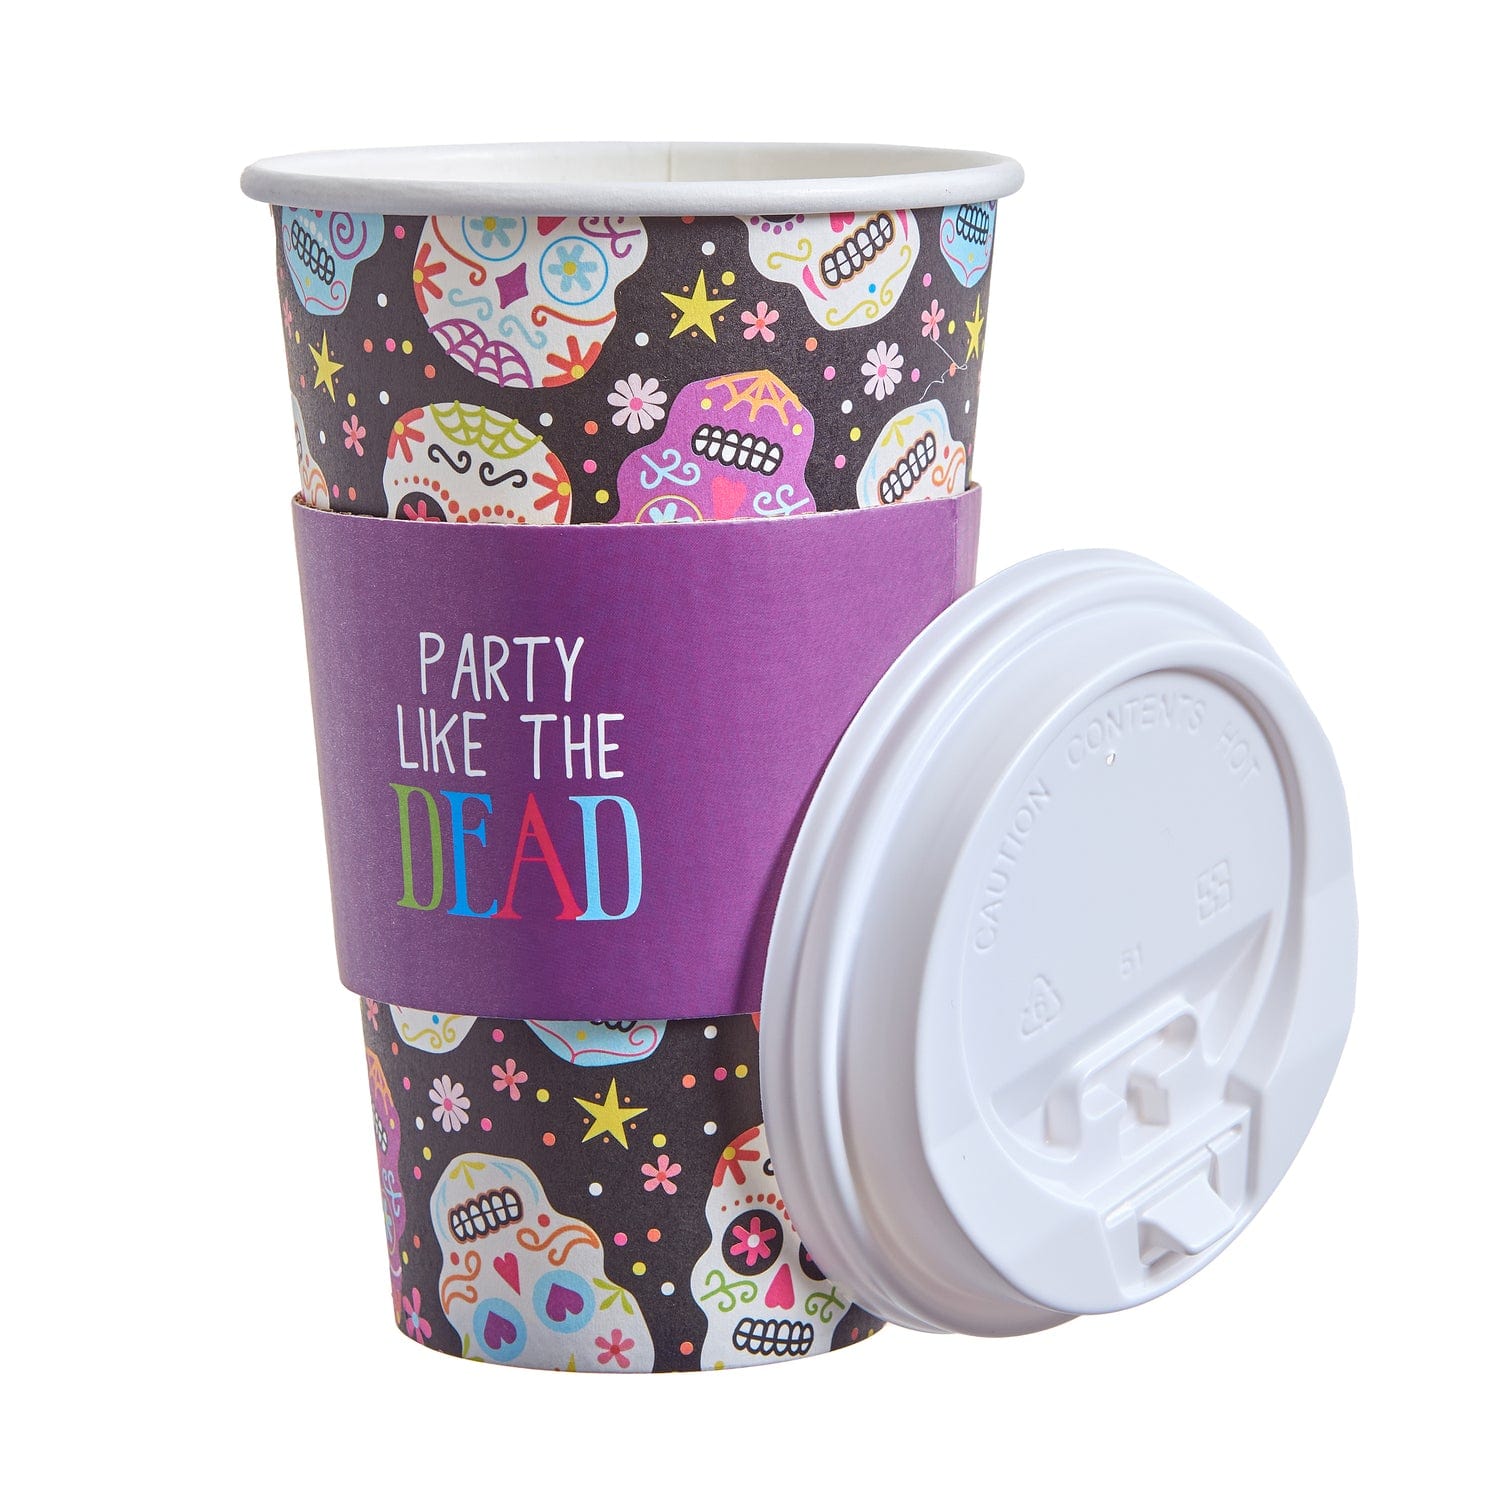 Party Like the Dead Hot/Cold Cup Roobee Drinkware 95379